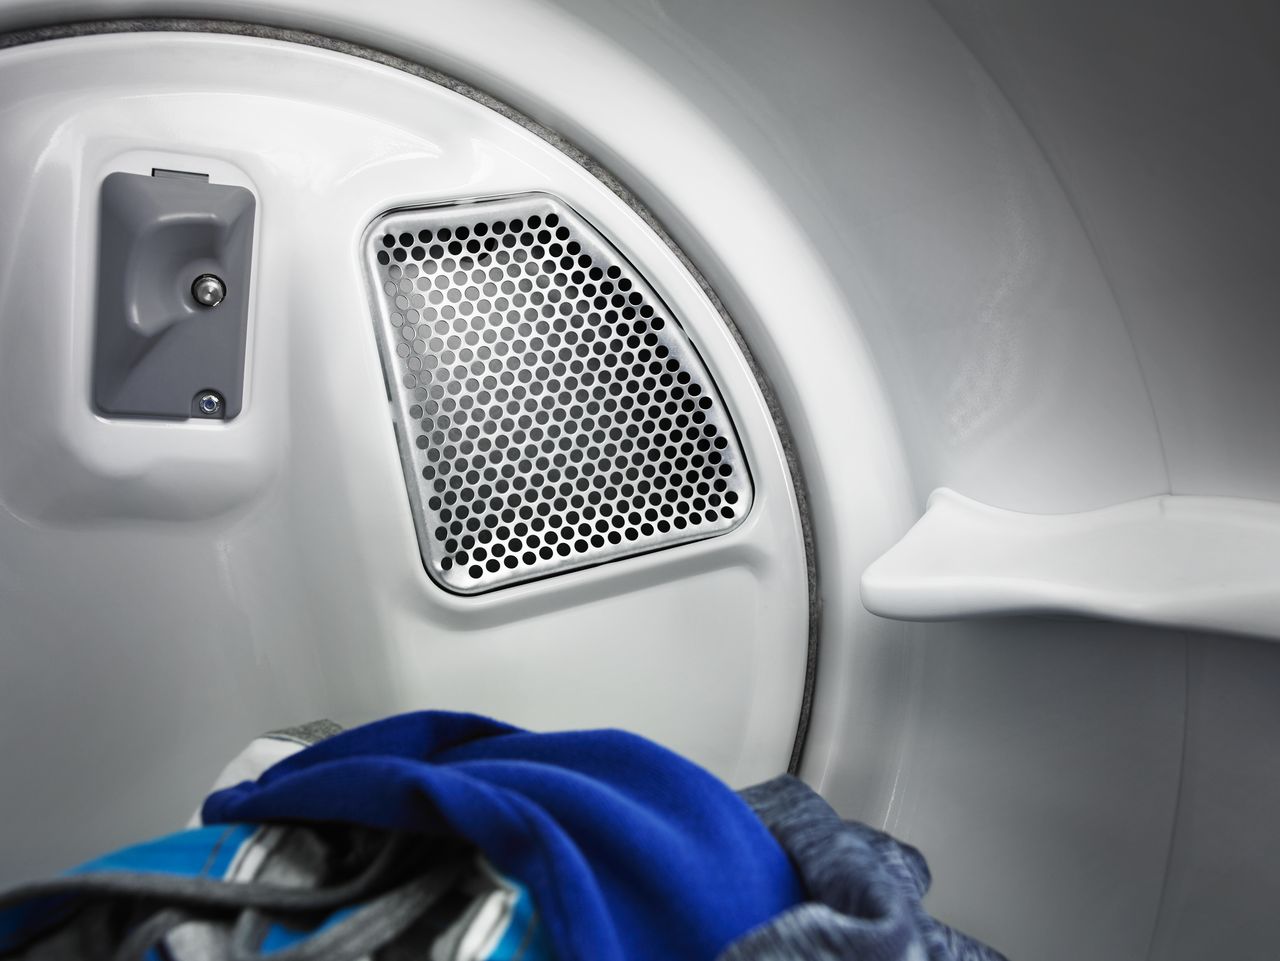 How To Fix A Maytag Dryer How to Repair a Non-Heating Maytag Dryer - Paradise Appliance Service